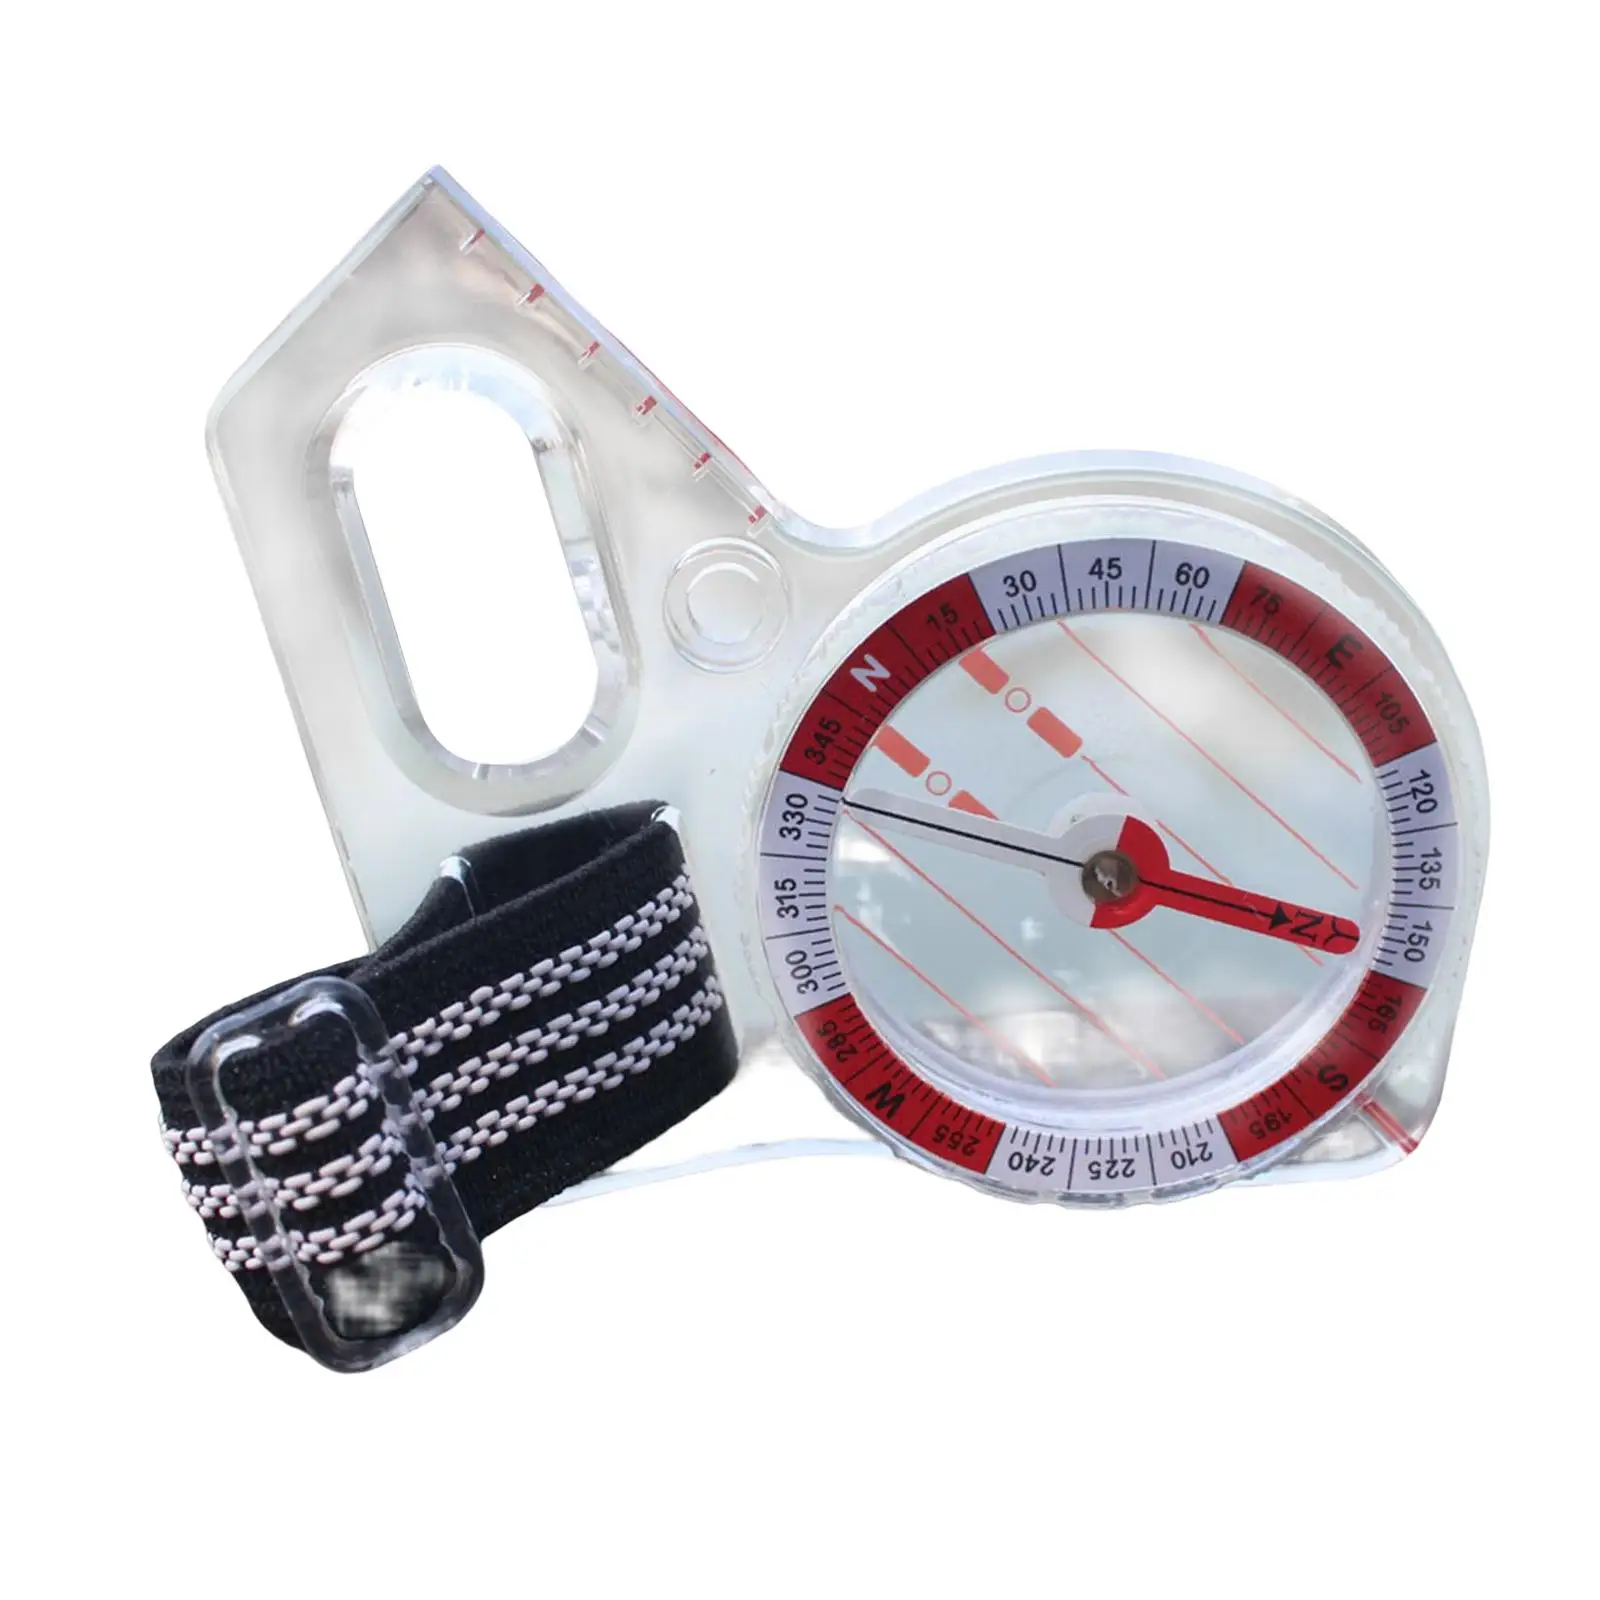 Thumb Compass Athletics Aim Advanced Movement Compass Map Scale for Map Reading Boating